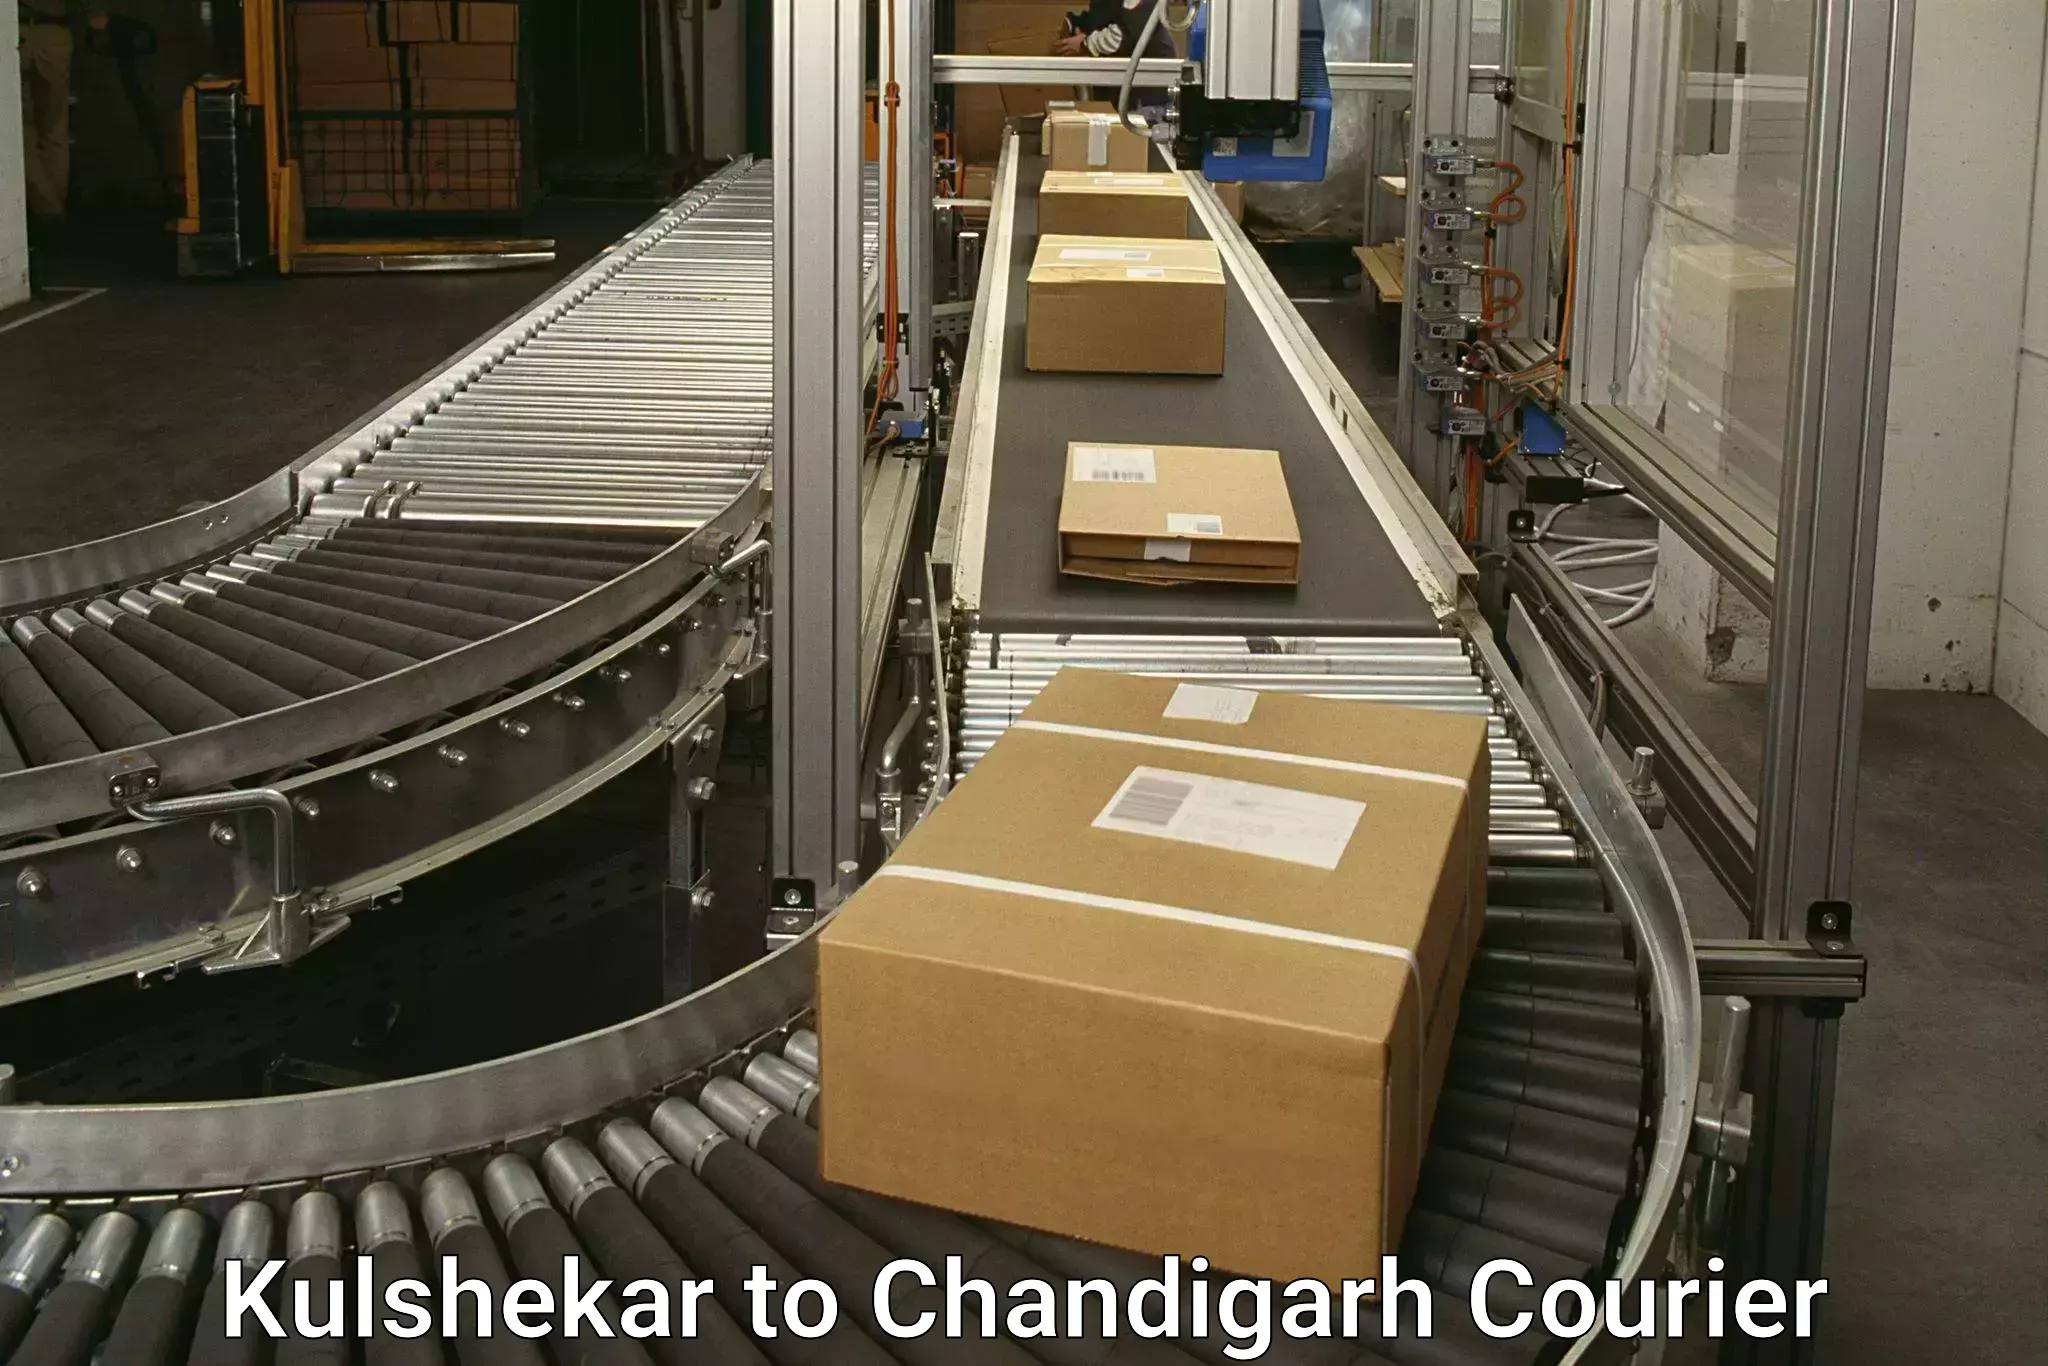 Express delivery network Kulshekar to Chandigarh